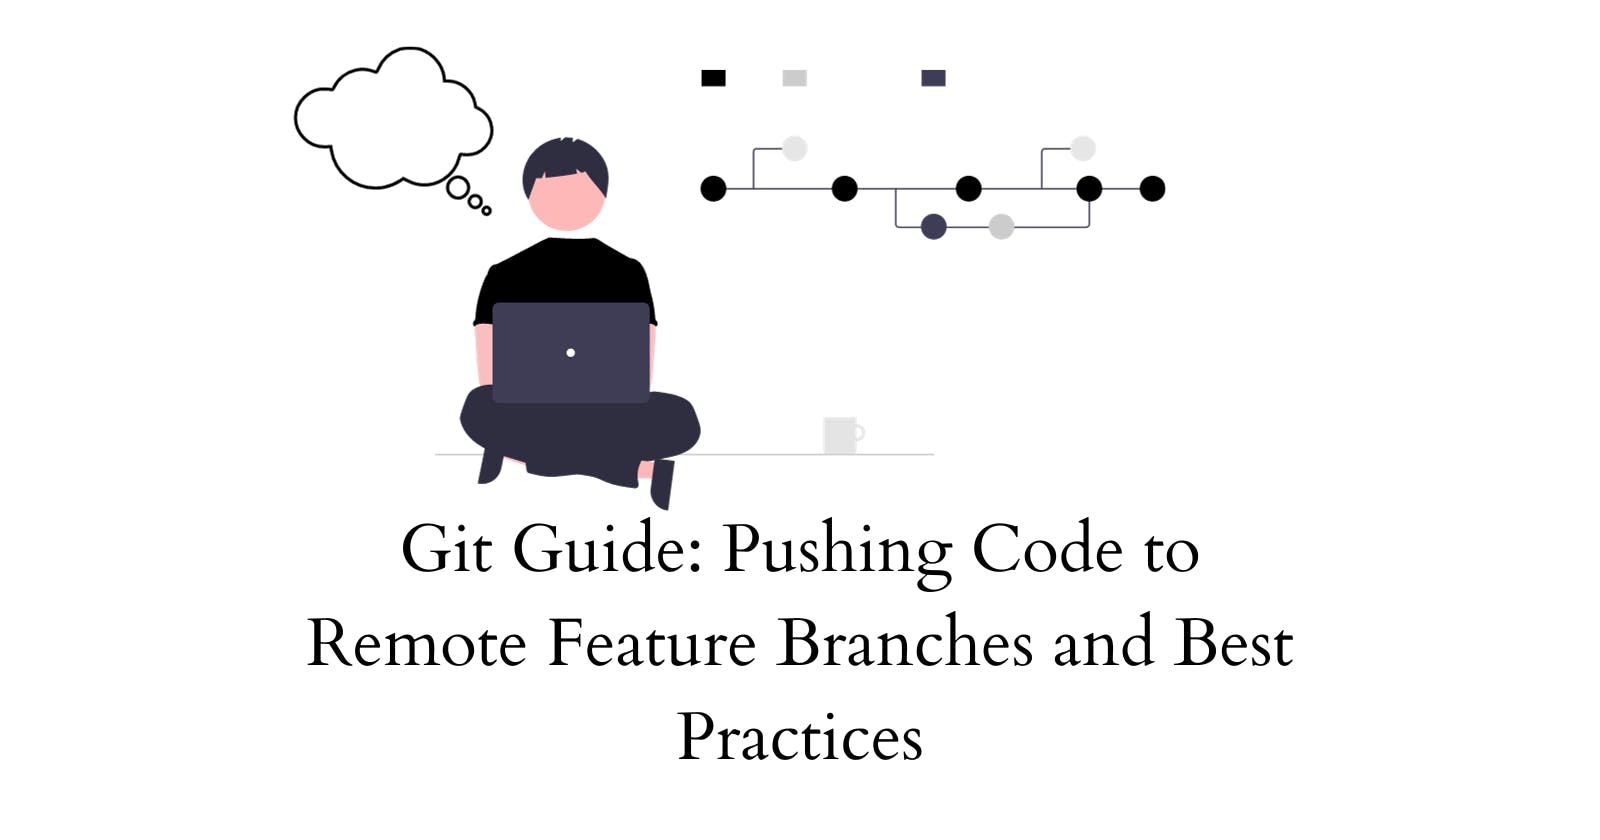 Git Guide: Pushing Code to Remote Feature Branches and Best Practices